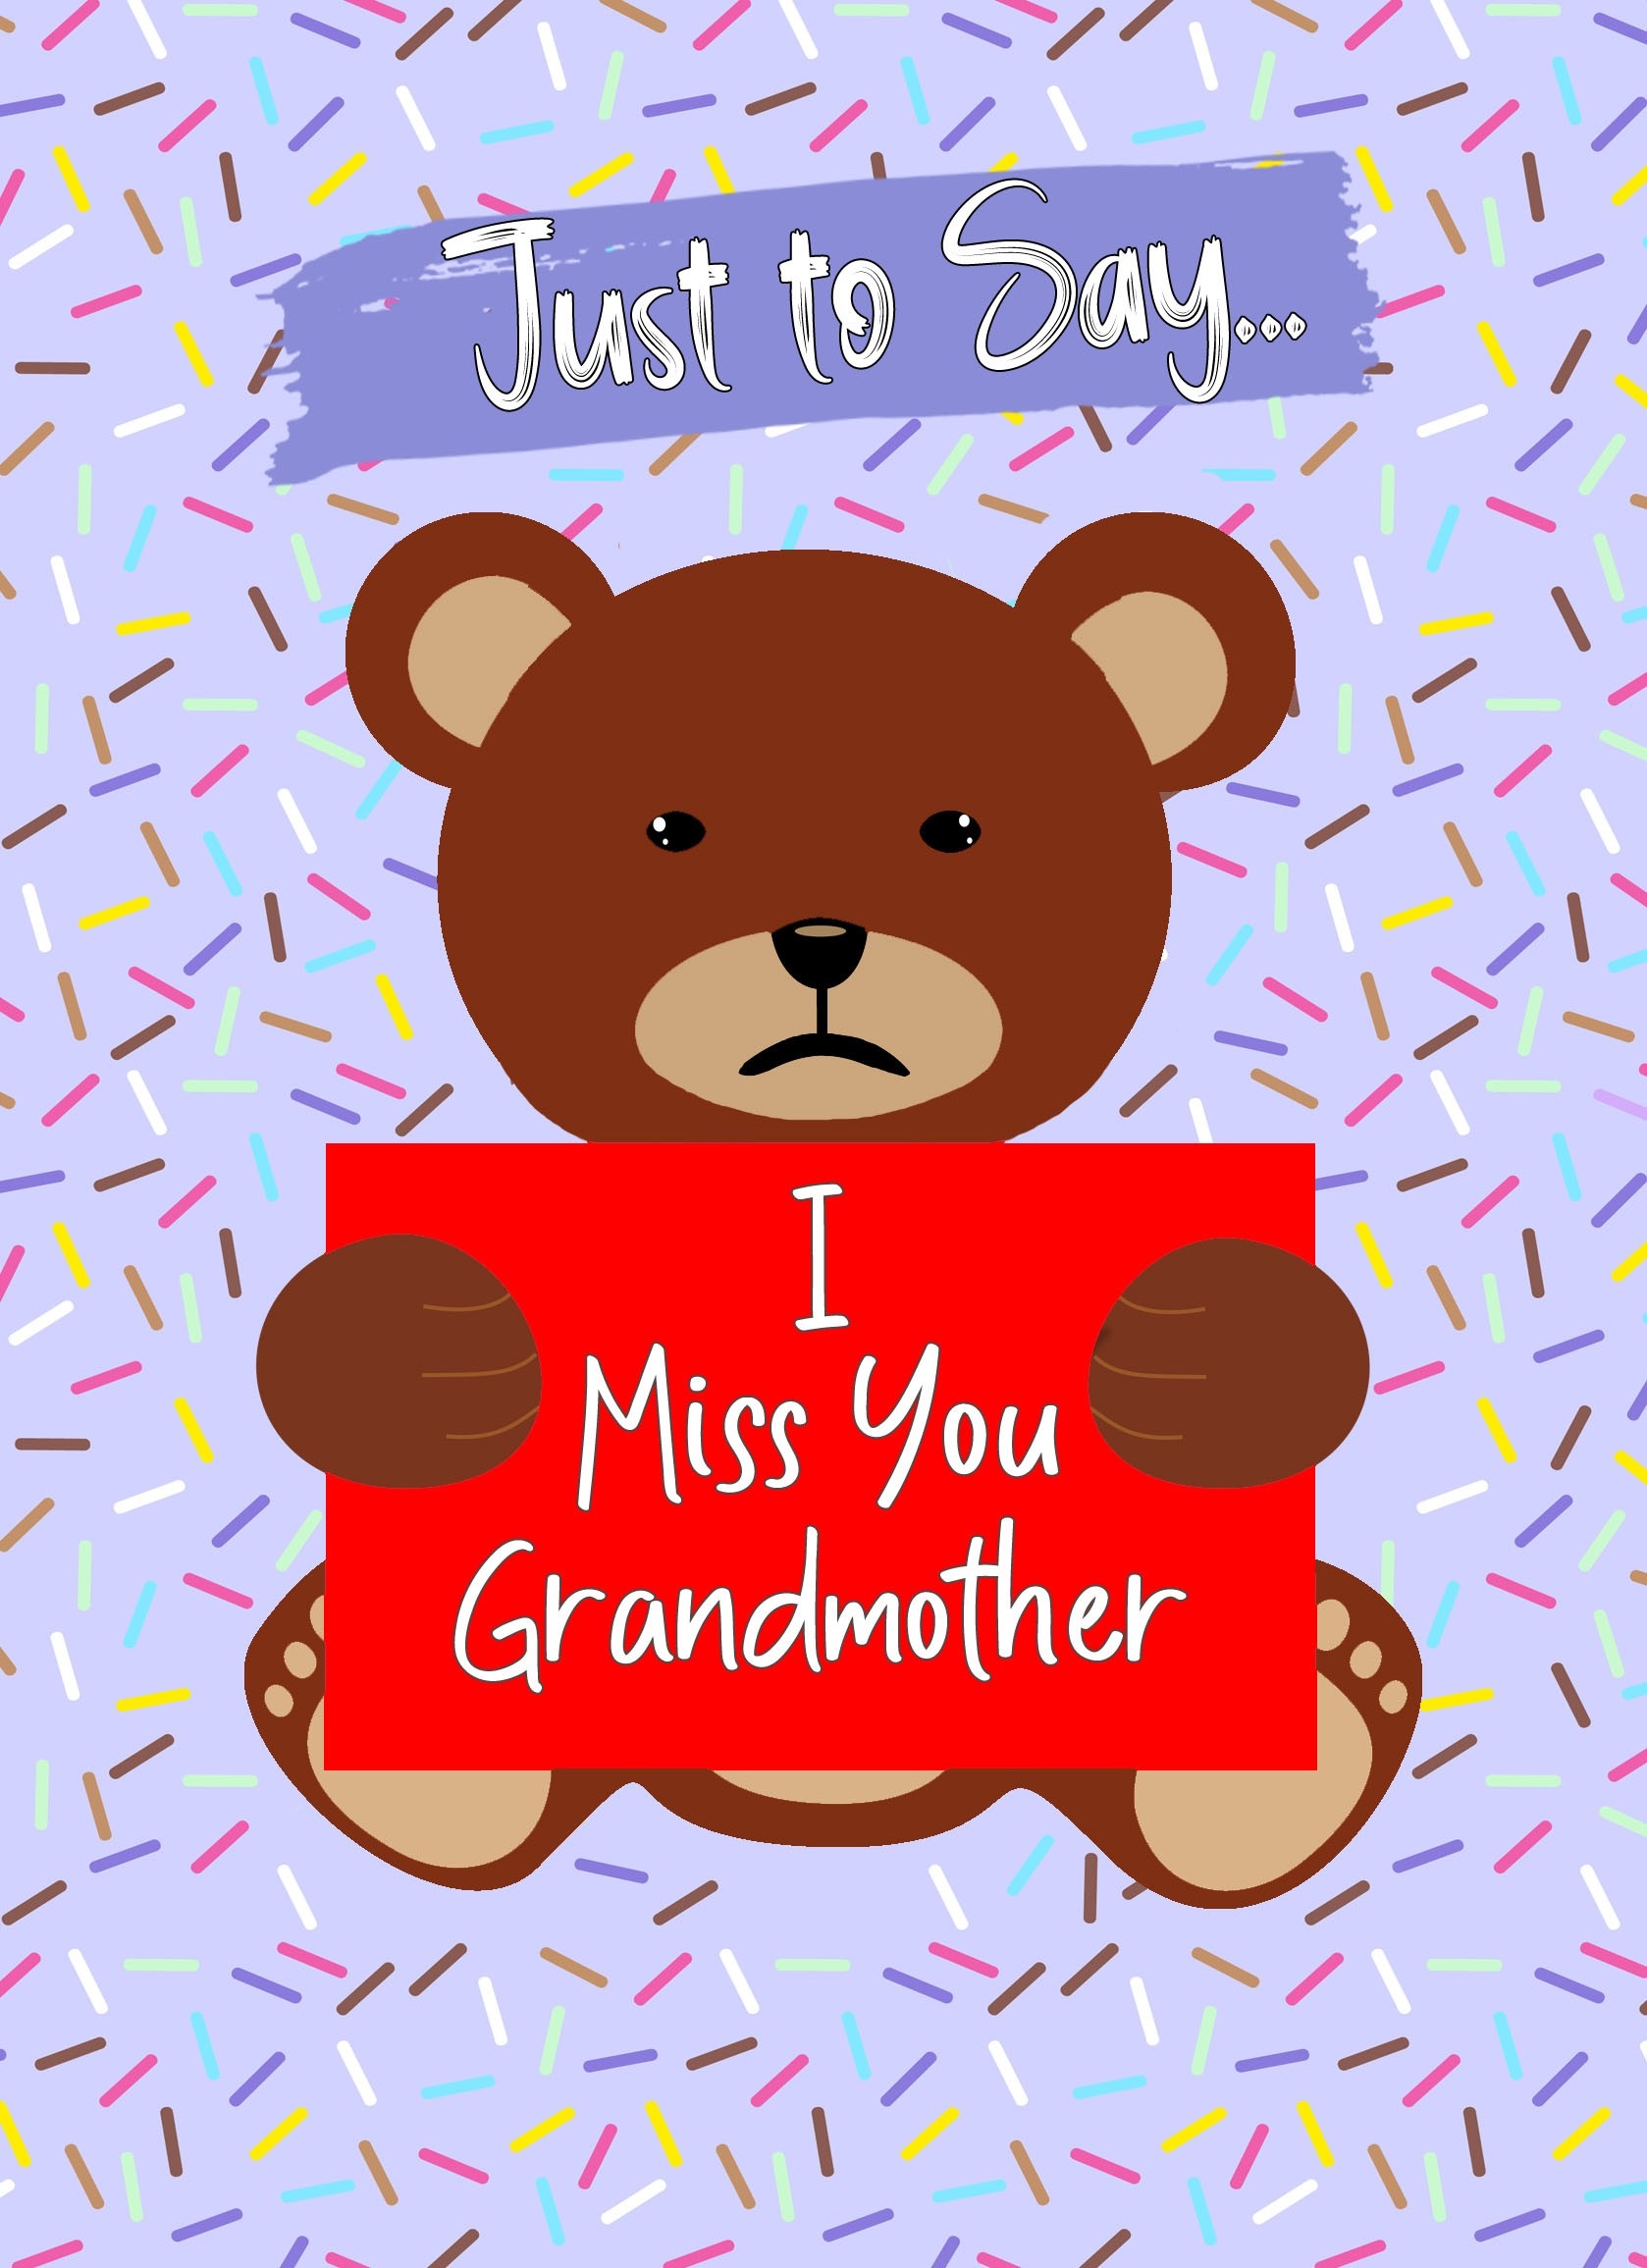 Missing You Card For Grandmother (Bear)